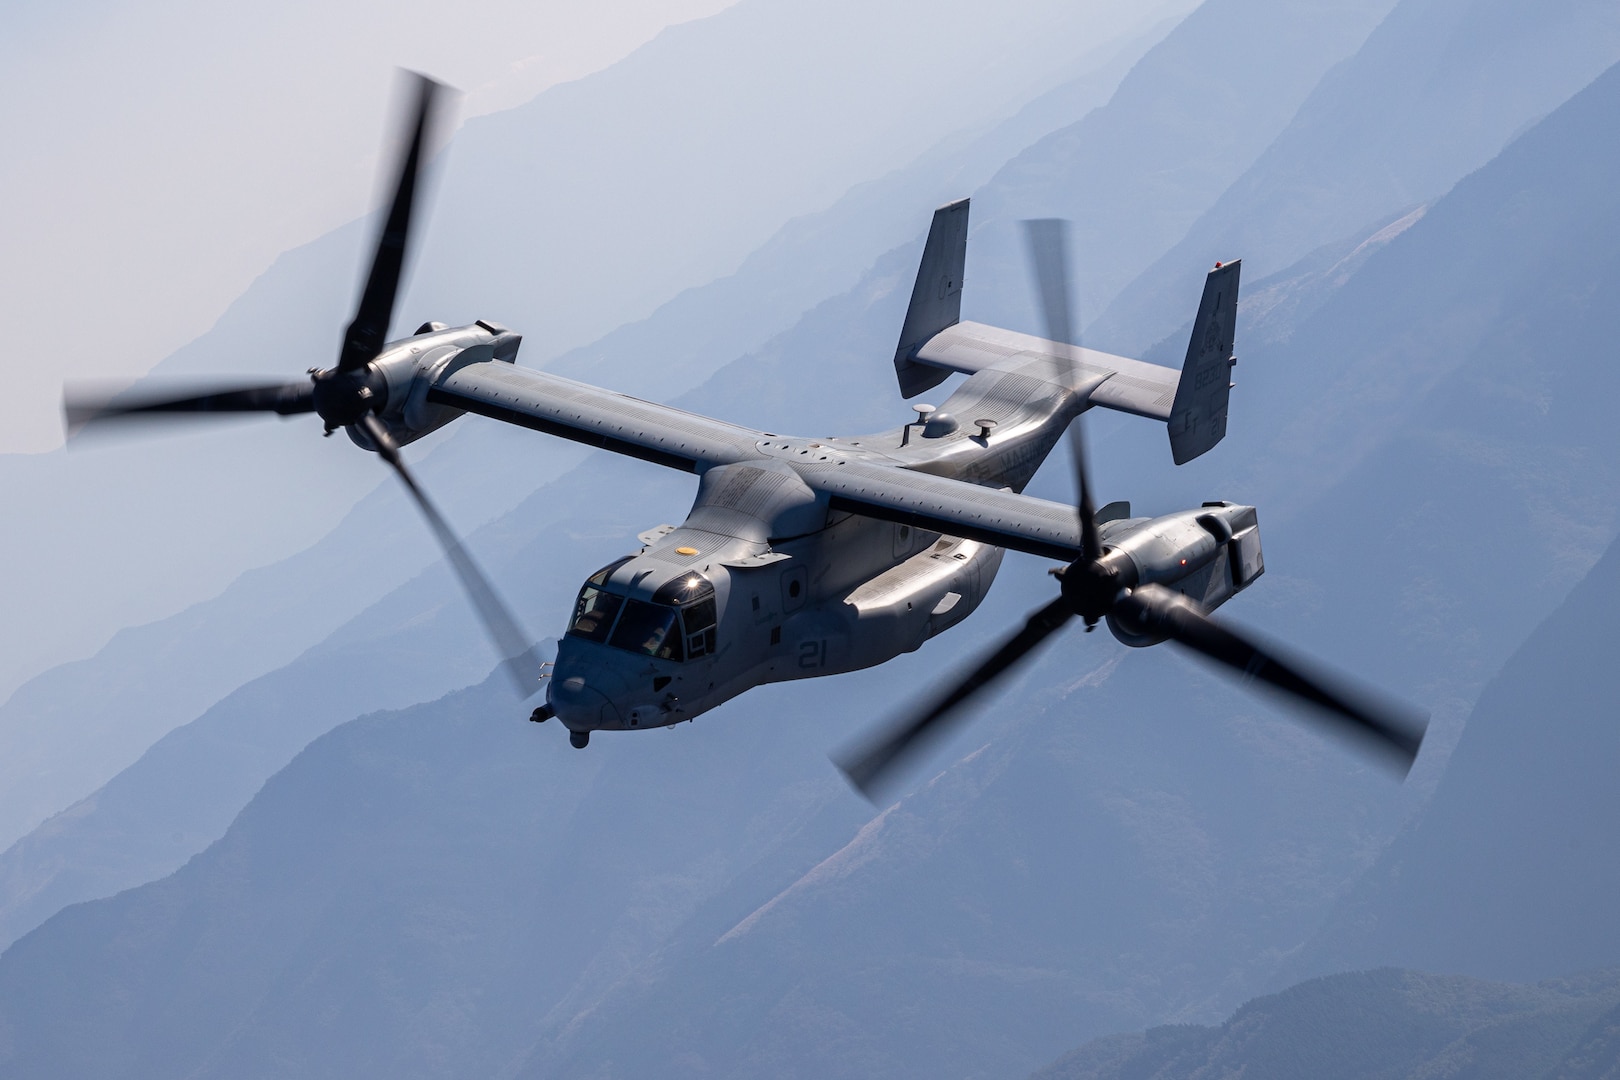 A U.S. Marine Corps MV-22 Osprey tiltrotor aircraft with Marine Medium Tiltrotor Squadron (VMM) 262, Marine Aircraft Group 36, 1st Marine Aircraft Wing, conducts a bilateral formation flight alongside Japan Ground Self-Defense Force service members with Western Army Aviation Group during the field training exercise portion of Resolute Dragon 23 off the coast of Kumamoto, Japan, Oct. 18, 2023. RD 23 is an annual bilateral exercise in Japan that strengthens the command, control, and multi-domain maneuver capabilities of Marines in III Marine Expeditionary Force and allied Japan Self-Defense Force personnel. (U.S. Marine Corps photo by Cpl. Kyle Chan)